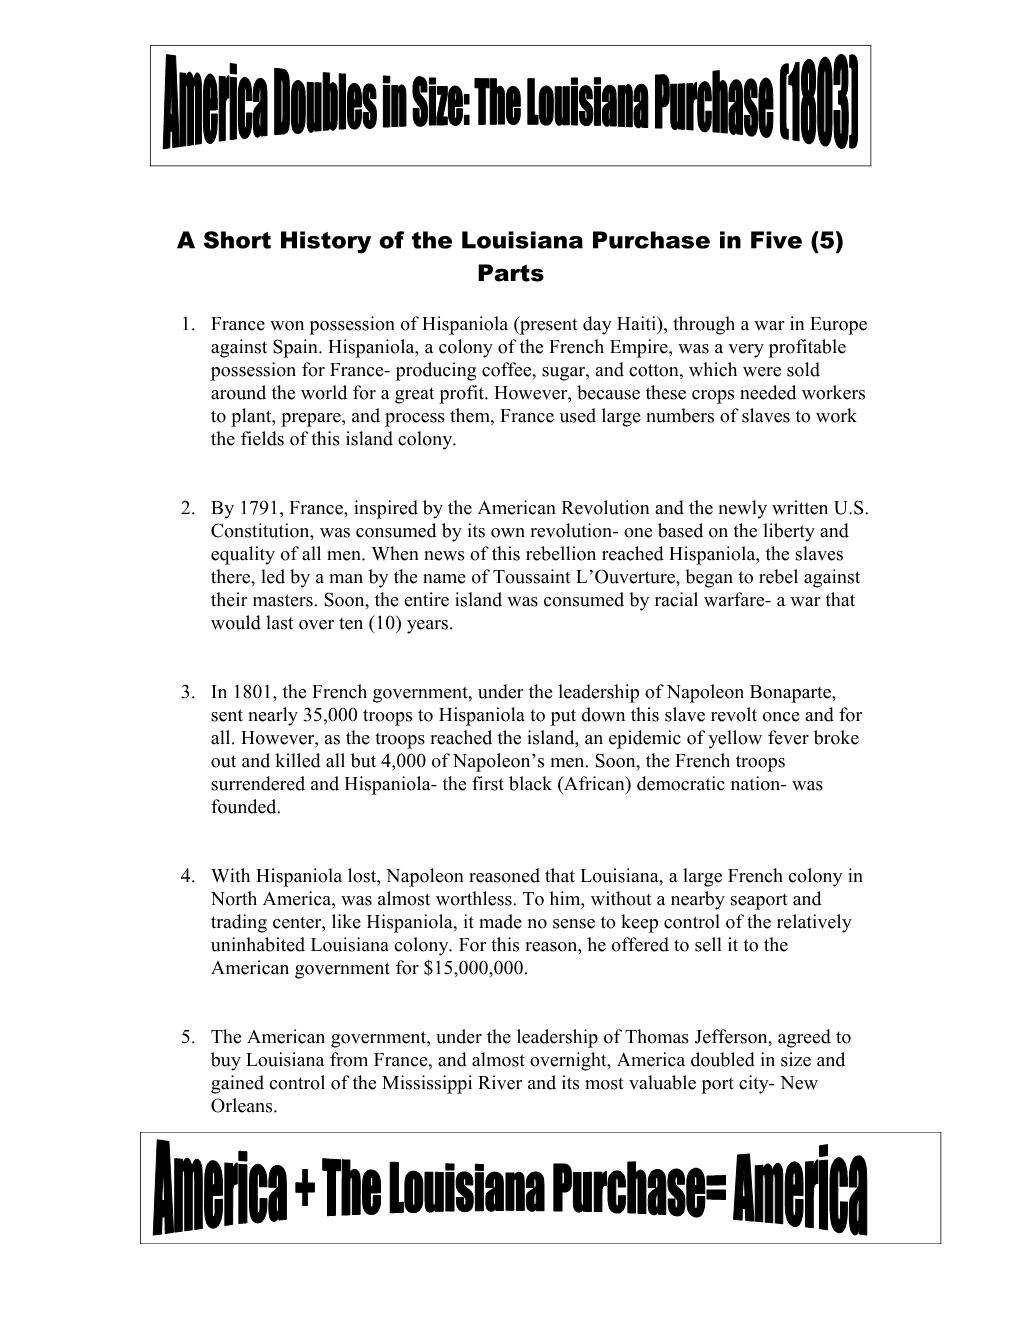 A Short History of the Louisiana Purchase in Five (5) Parts